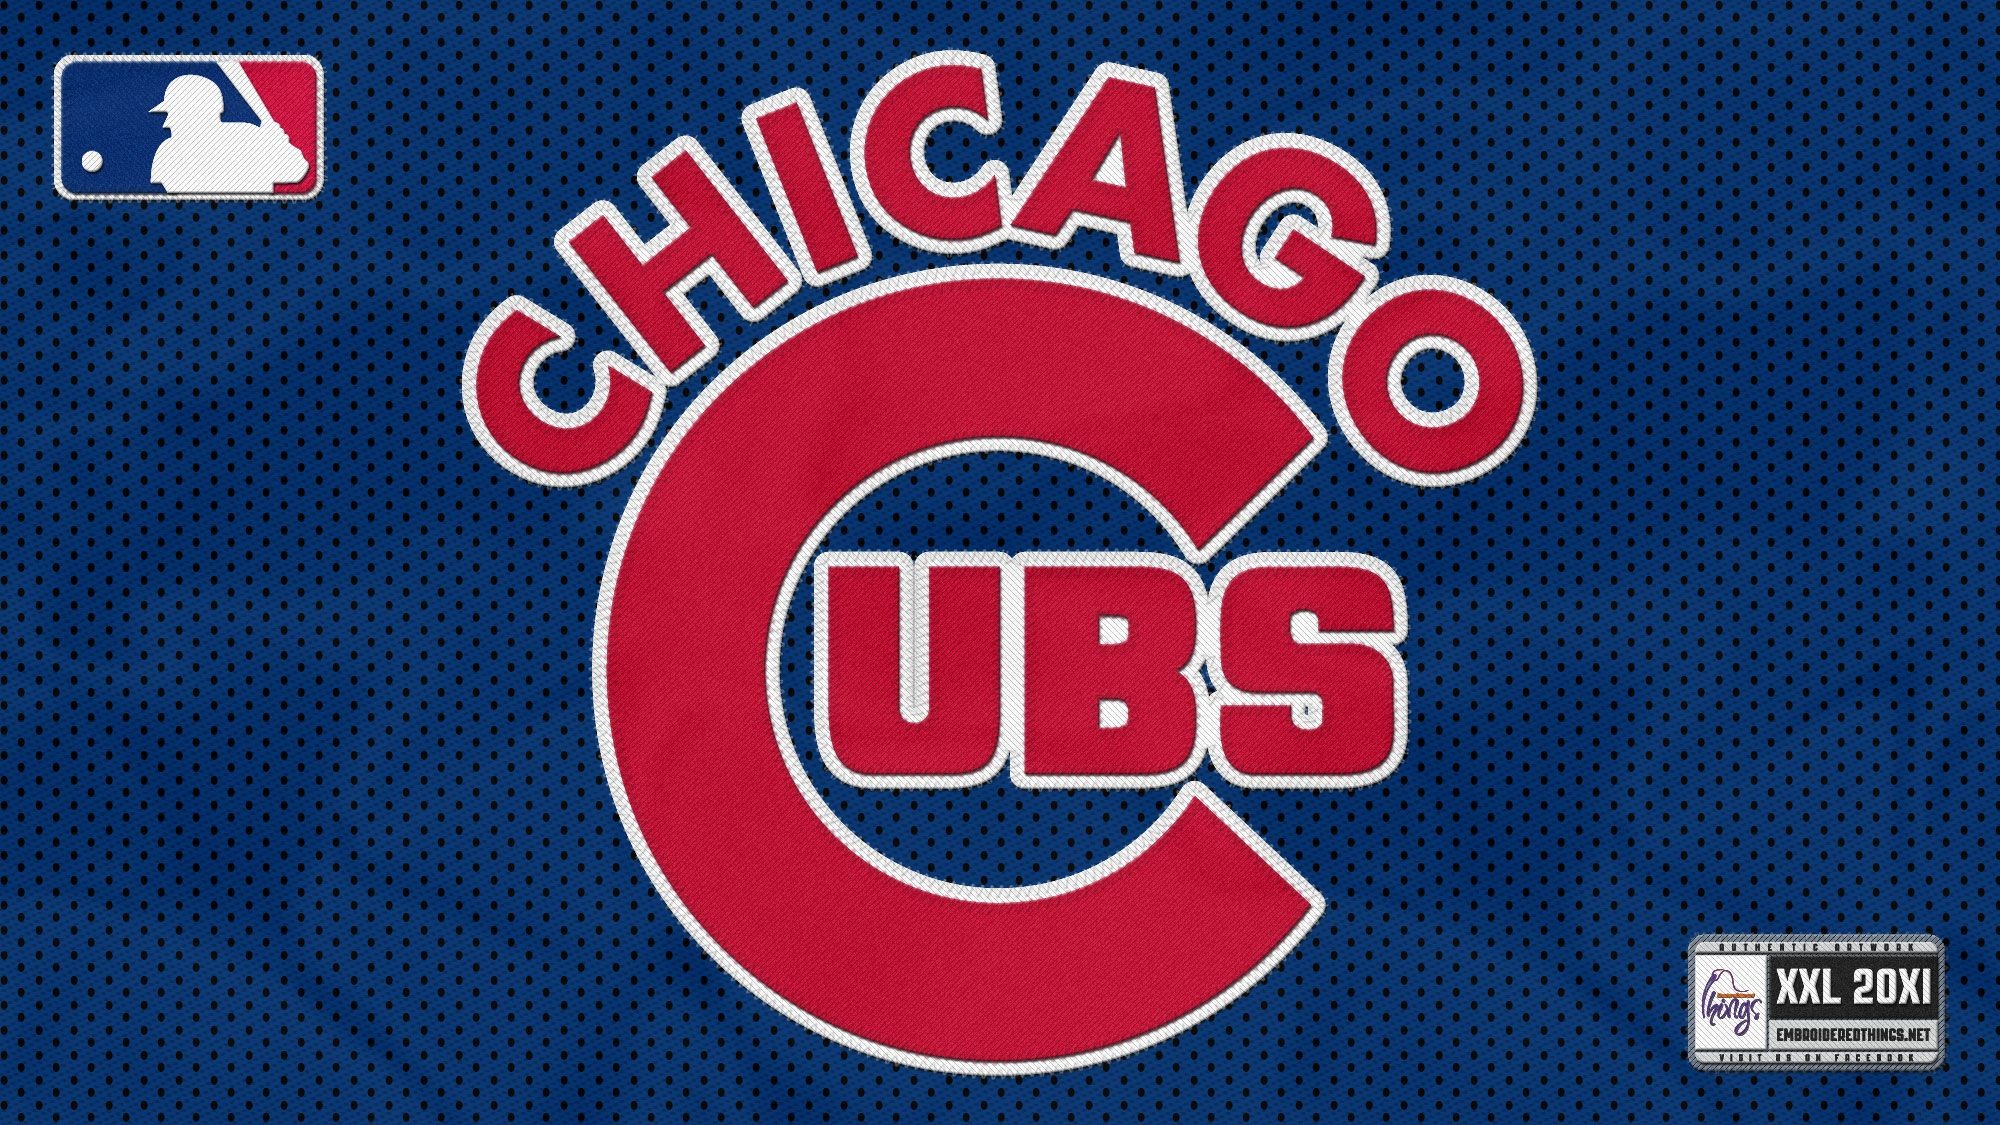 Chicago Cubs Full Screen Chicago Cubs Hd Images Chicago Cubs Wallpaper Wpt7603020 2000x1125